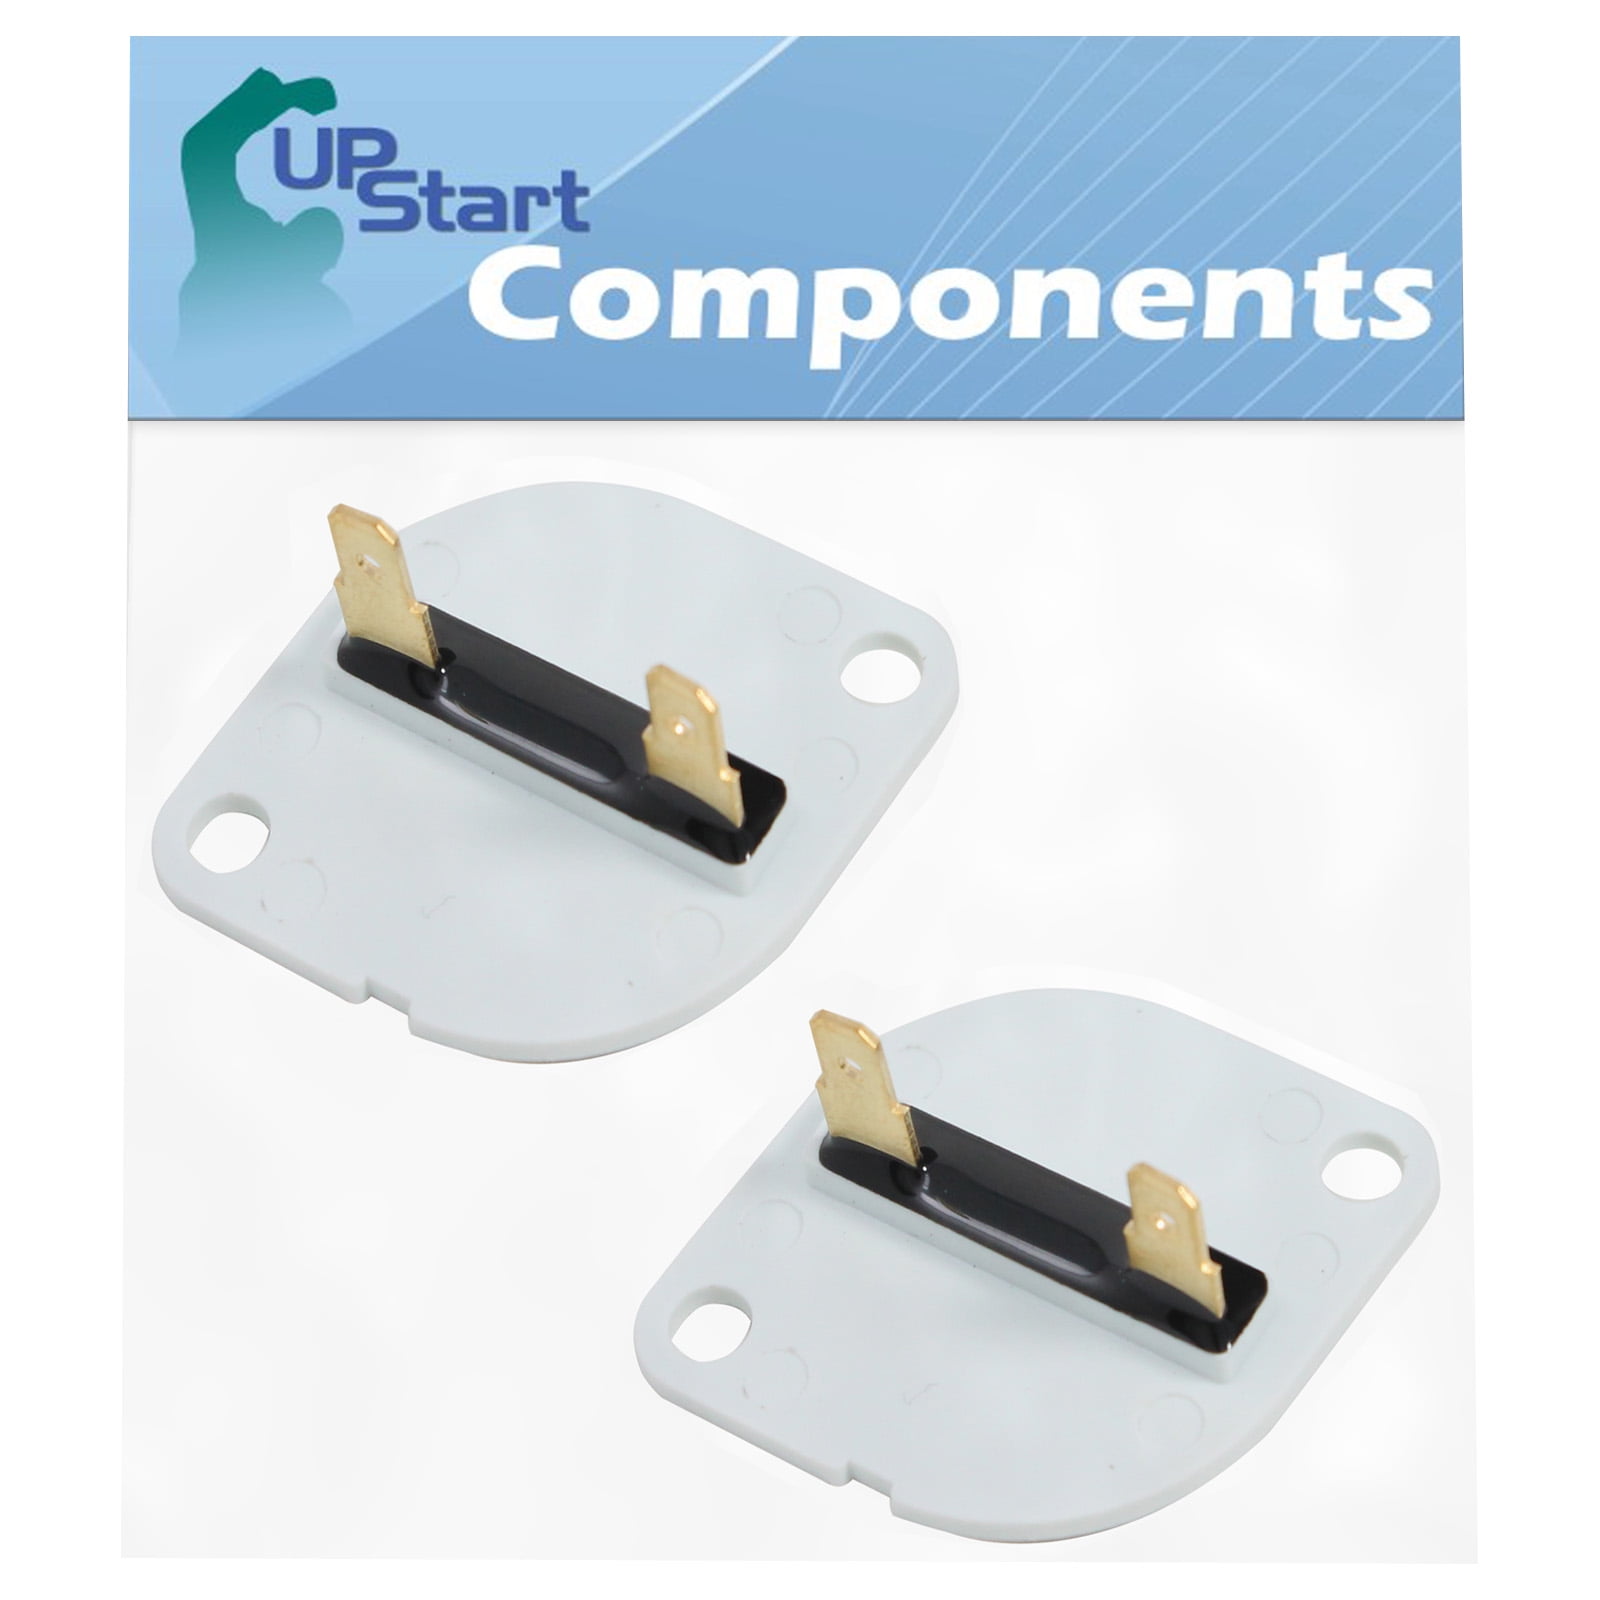 2 pack Dryers Replacement Thermofuse 3390719 for Whirlpool Dryers 